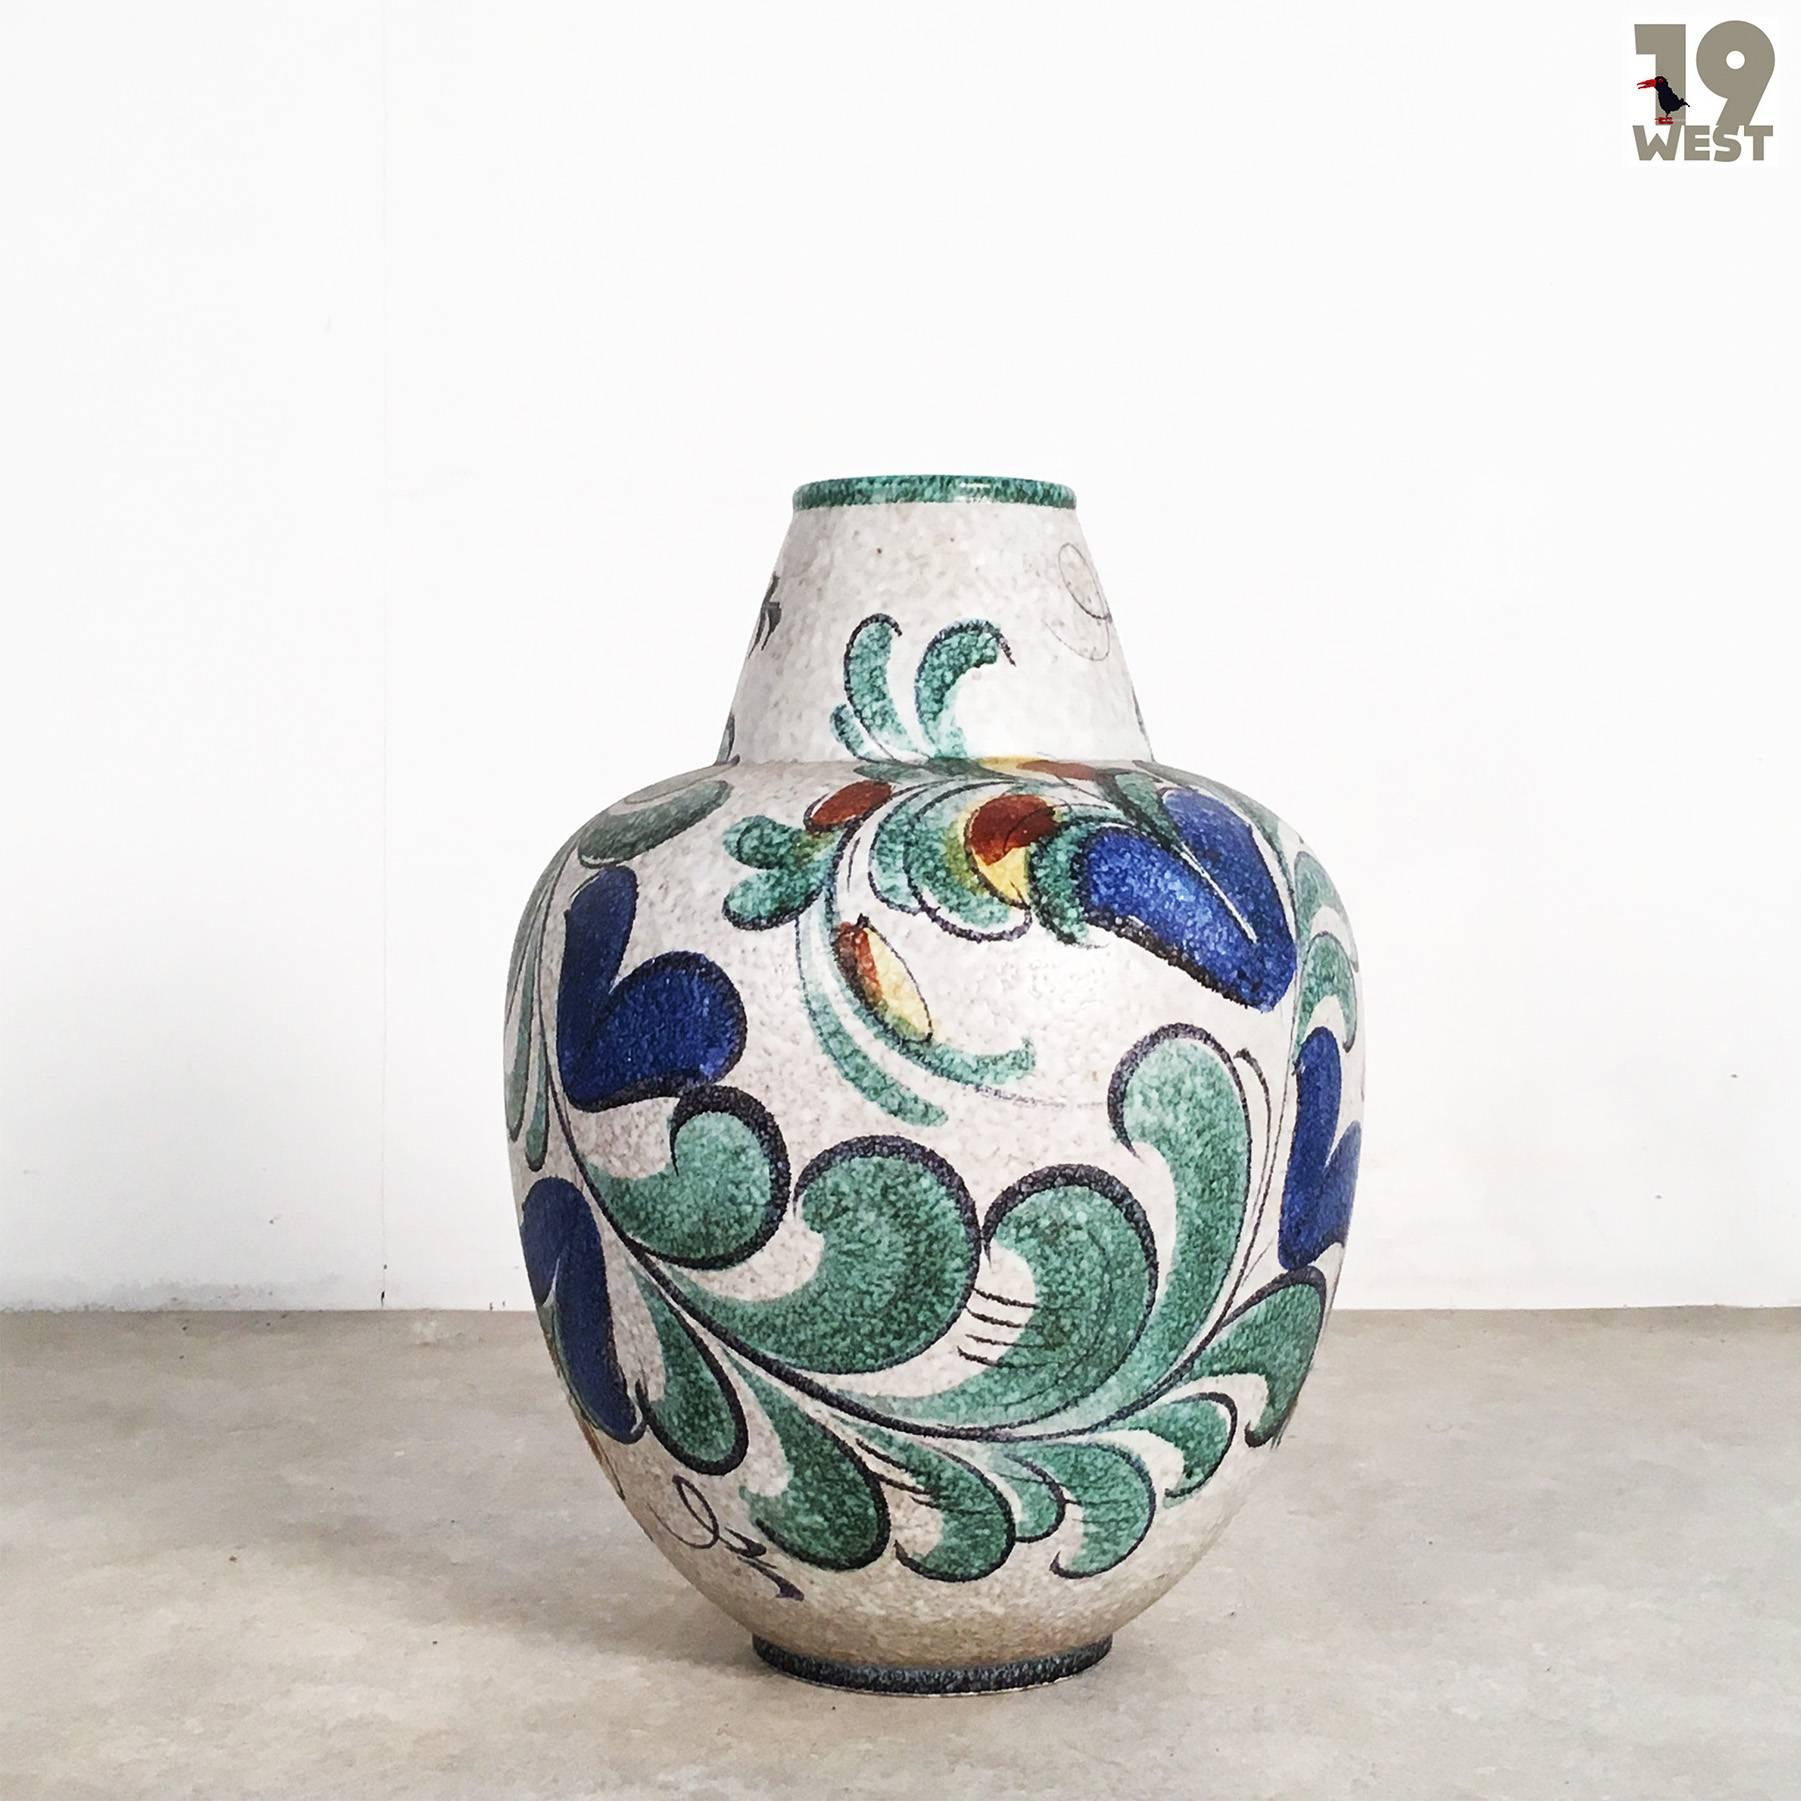 West German Pottery floor vase from the 1950s, manufactured by Ruscha. The vase stands out for its beautiful hand-painted decor, which is called 